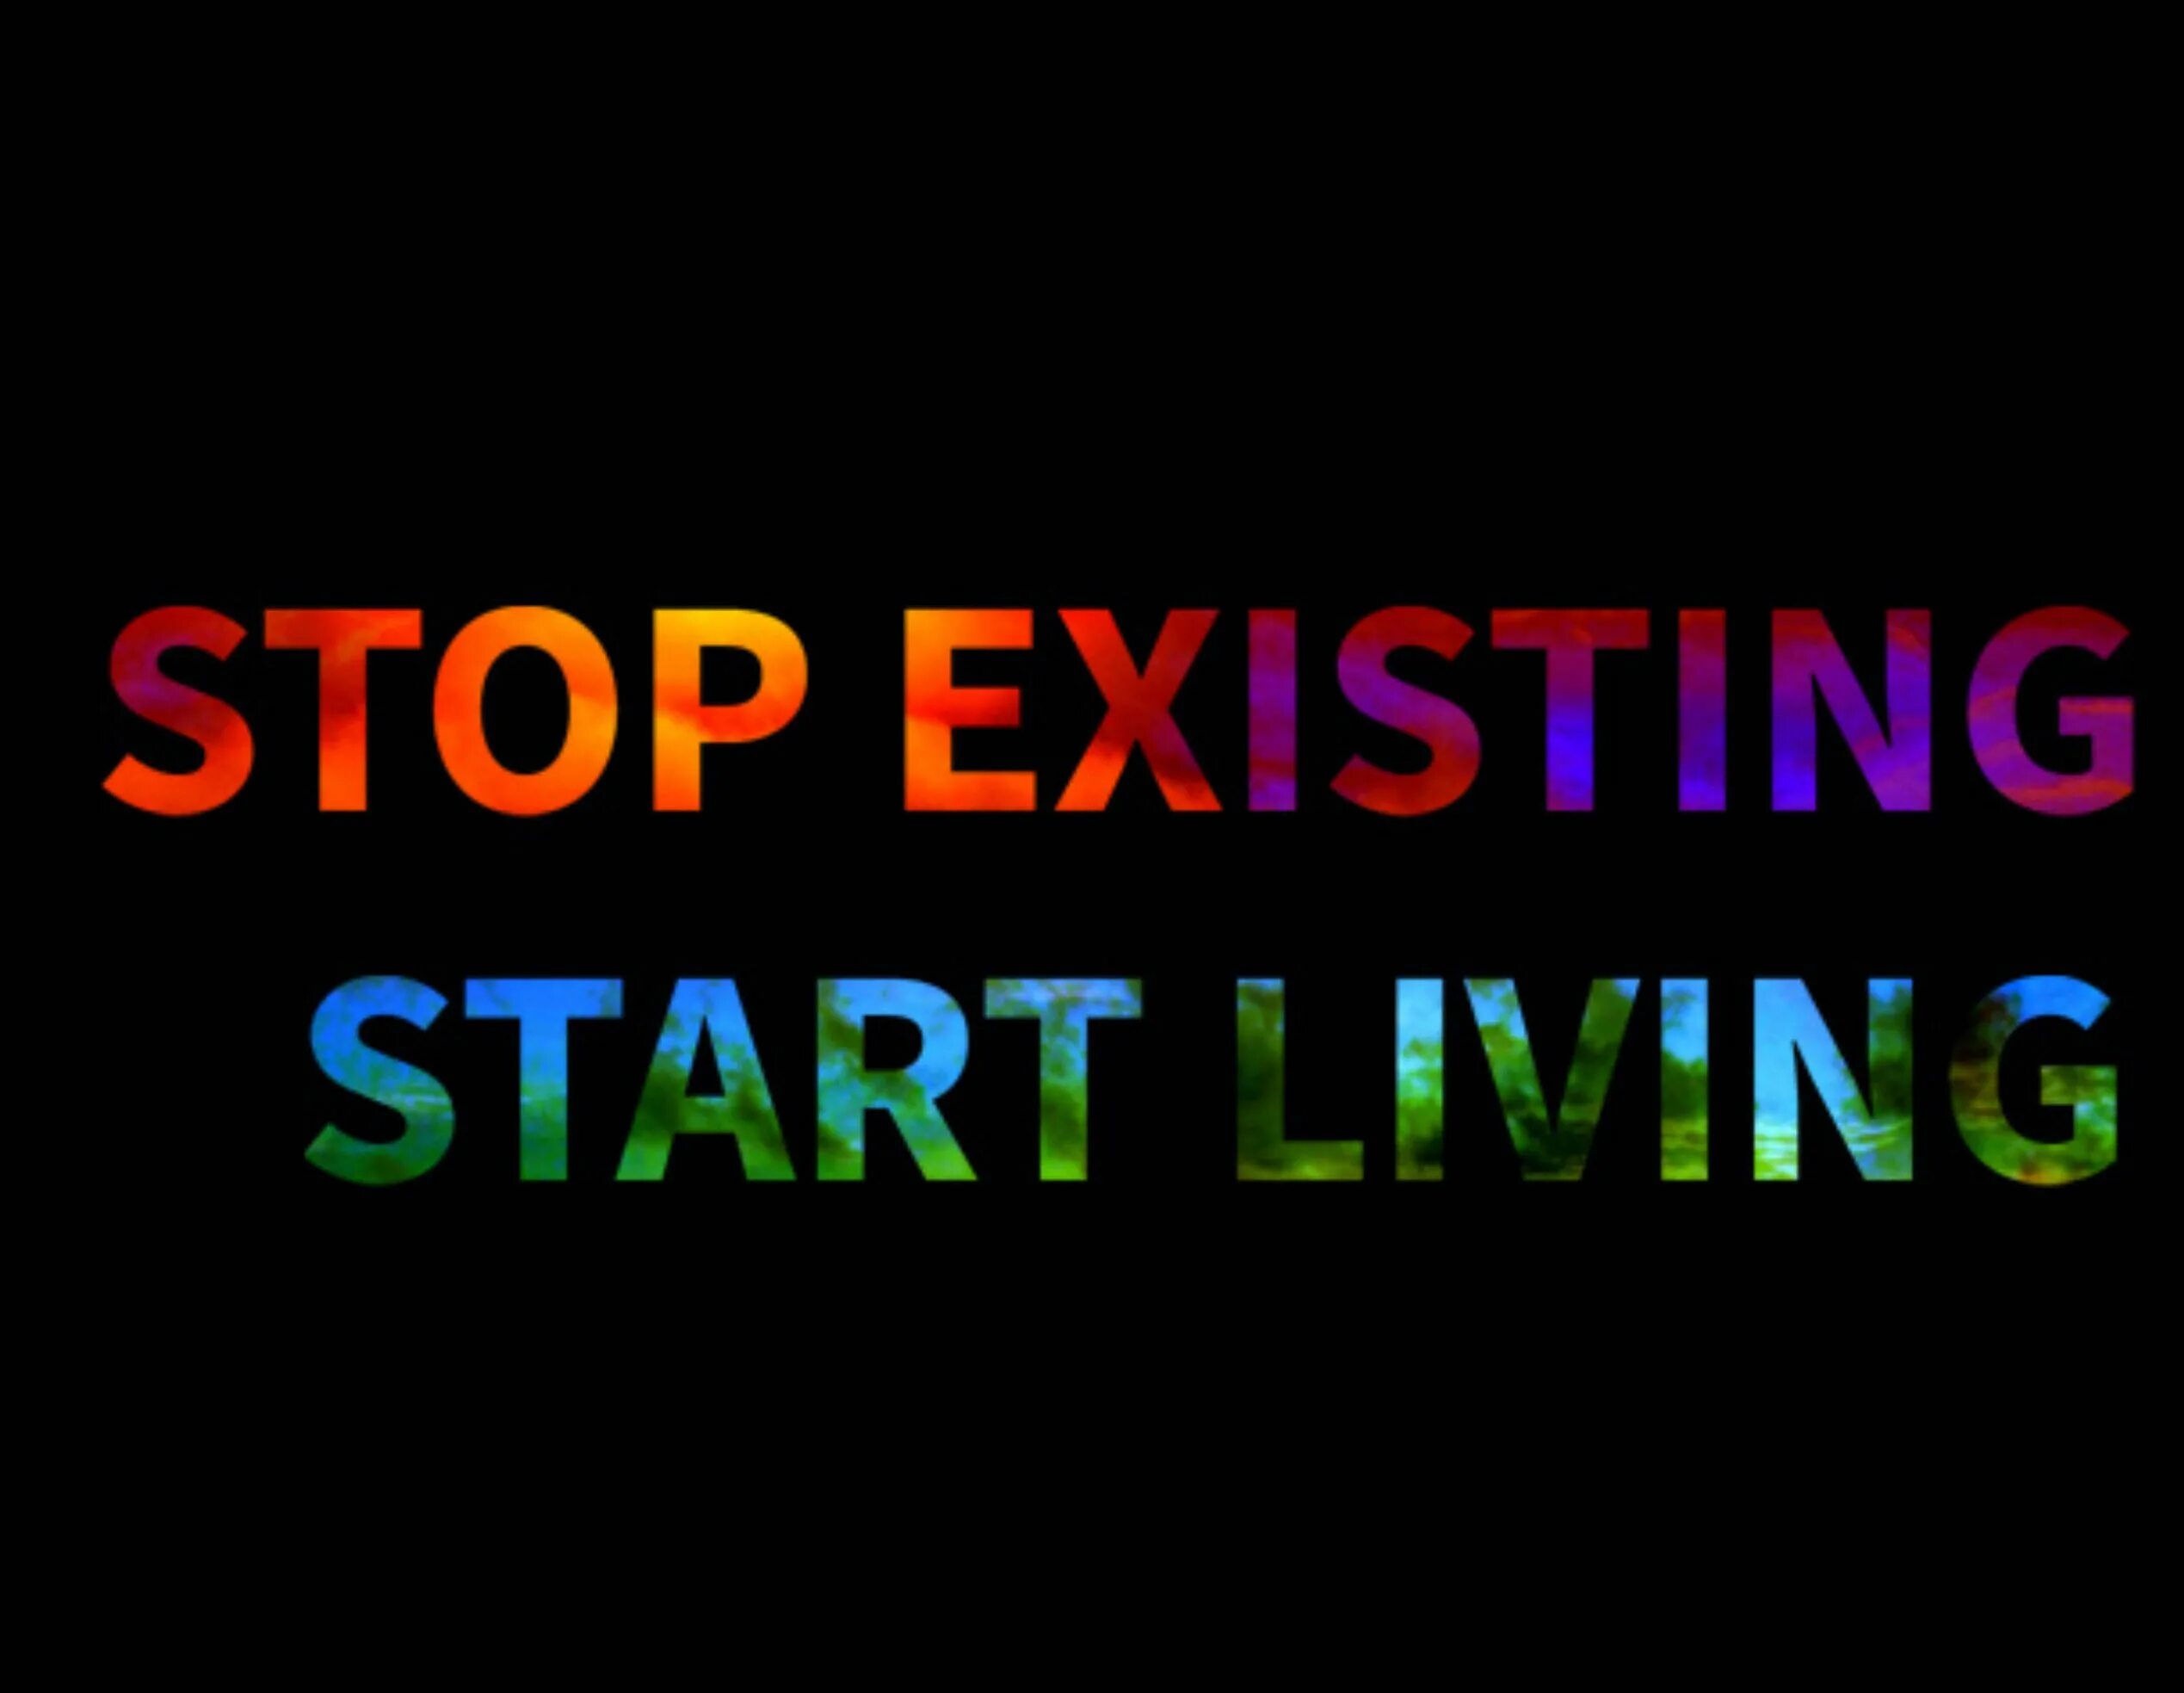 Stop existing and start Living. Stop just existing. Start Living. Existing. Stop existing and start Living nature. Starting to exist